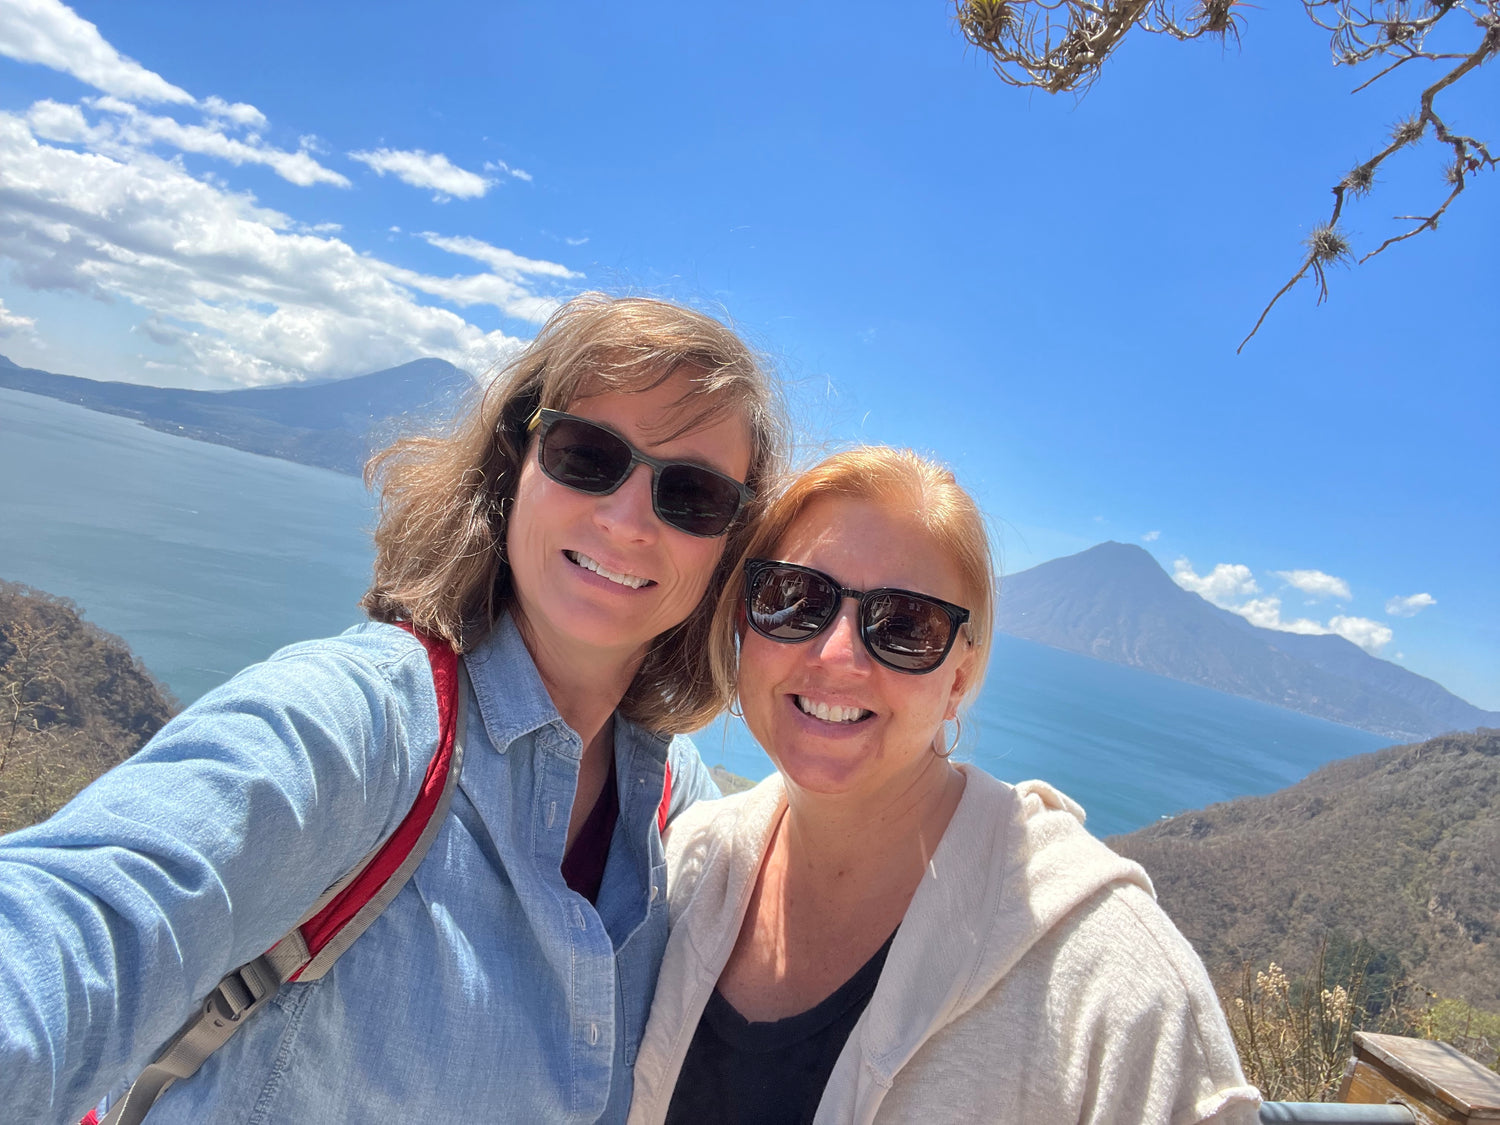 Ginger Shields and Tiffany Vestal, co-founders of Intertwined, in front of Lake Atitlan in Guatemala